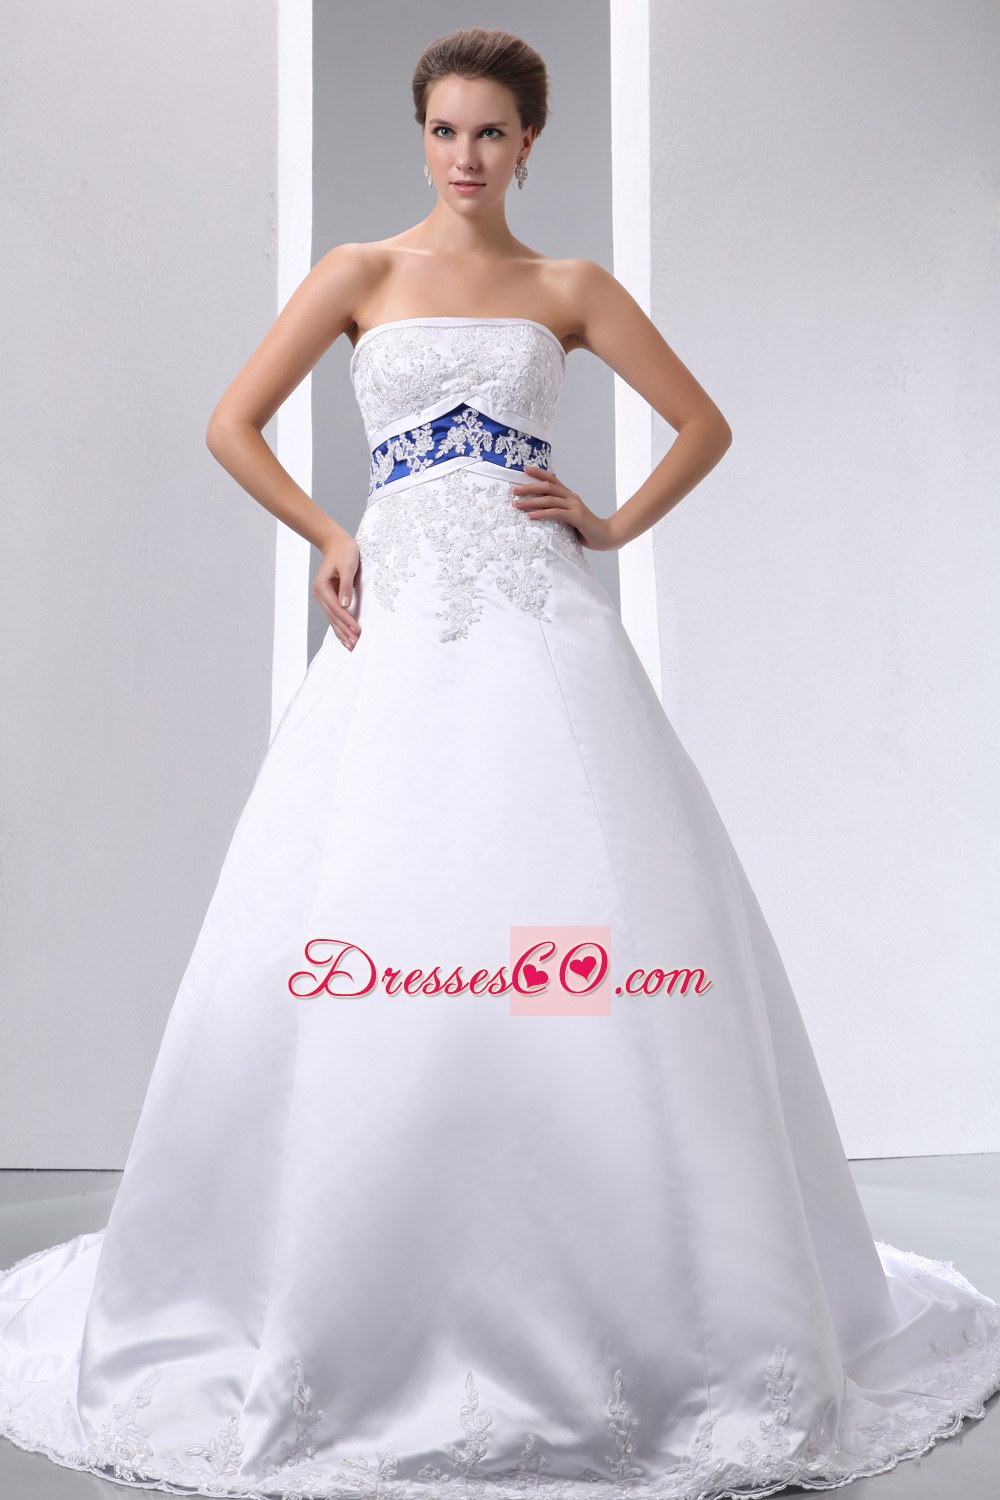 Graceful A-line Strapless Brush Train Satin and Lace Appliques Wedding Dress